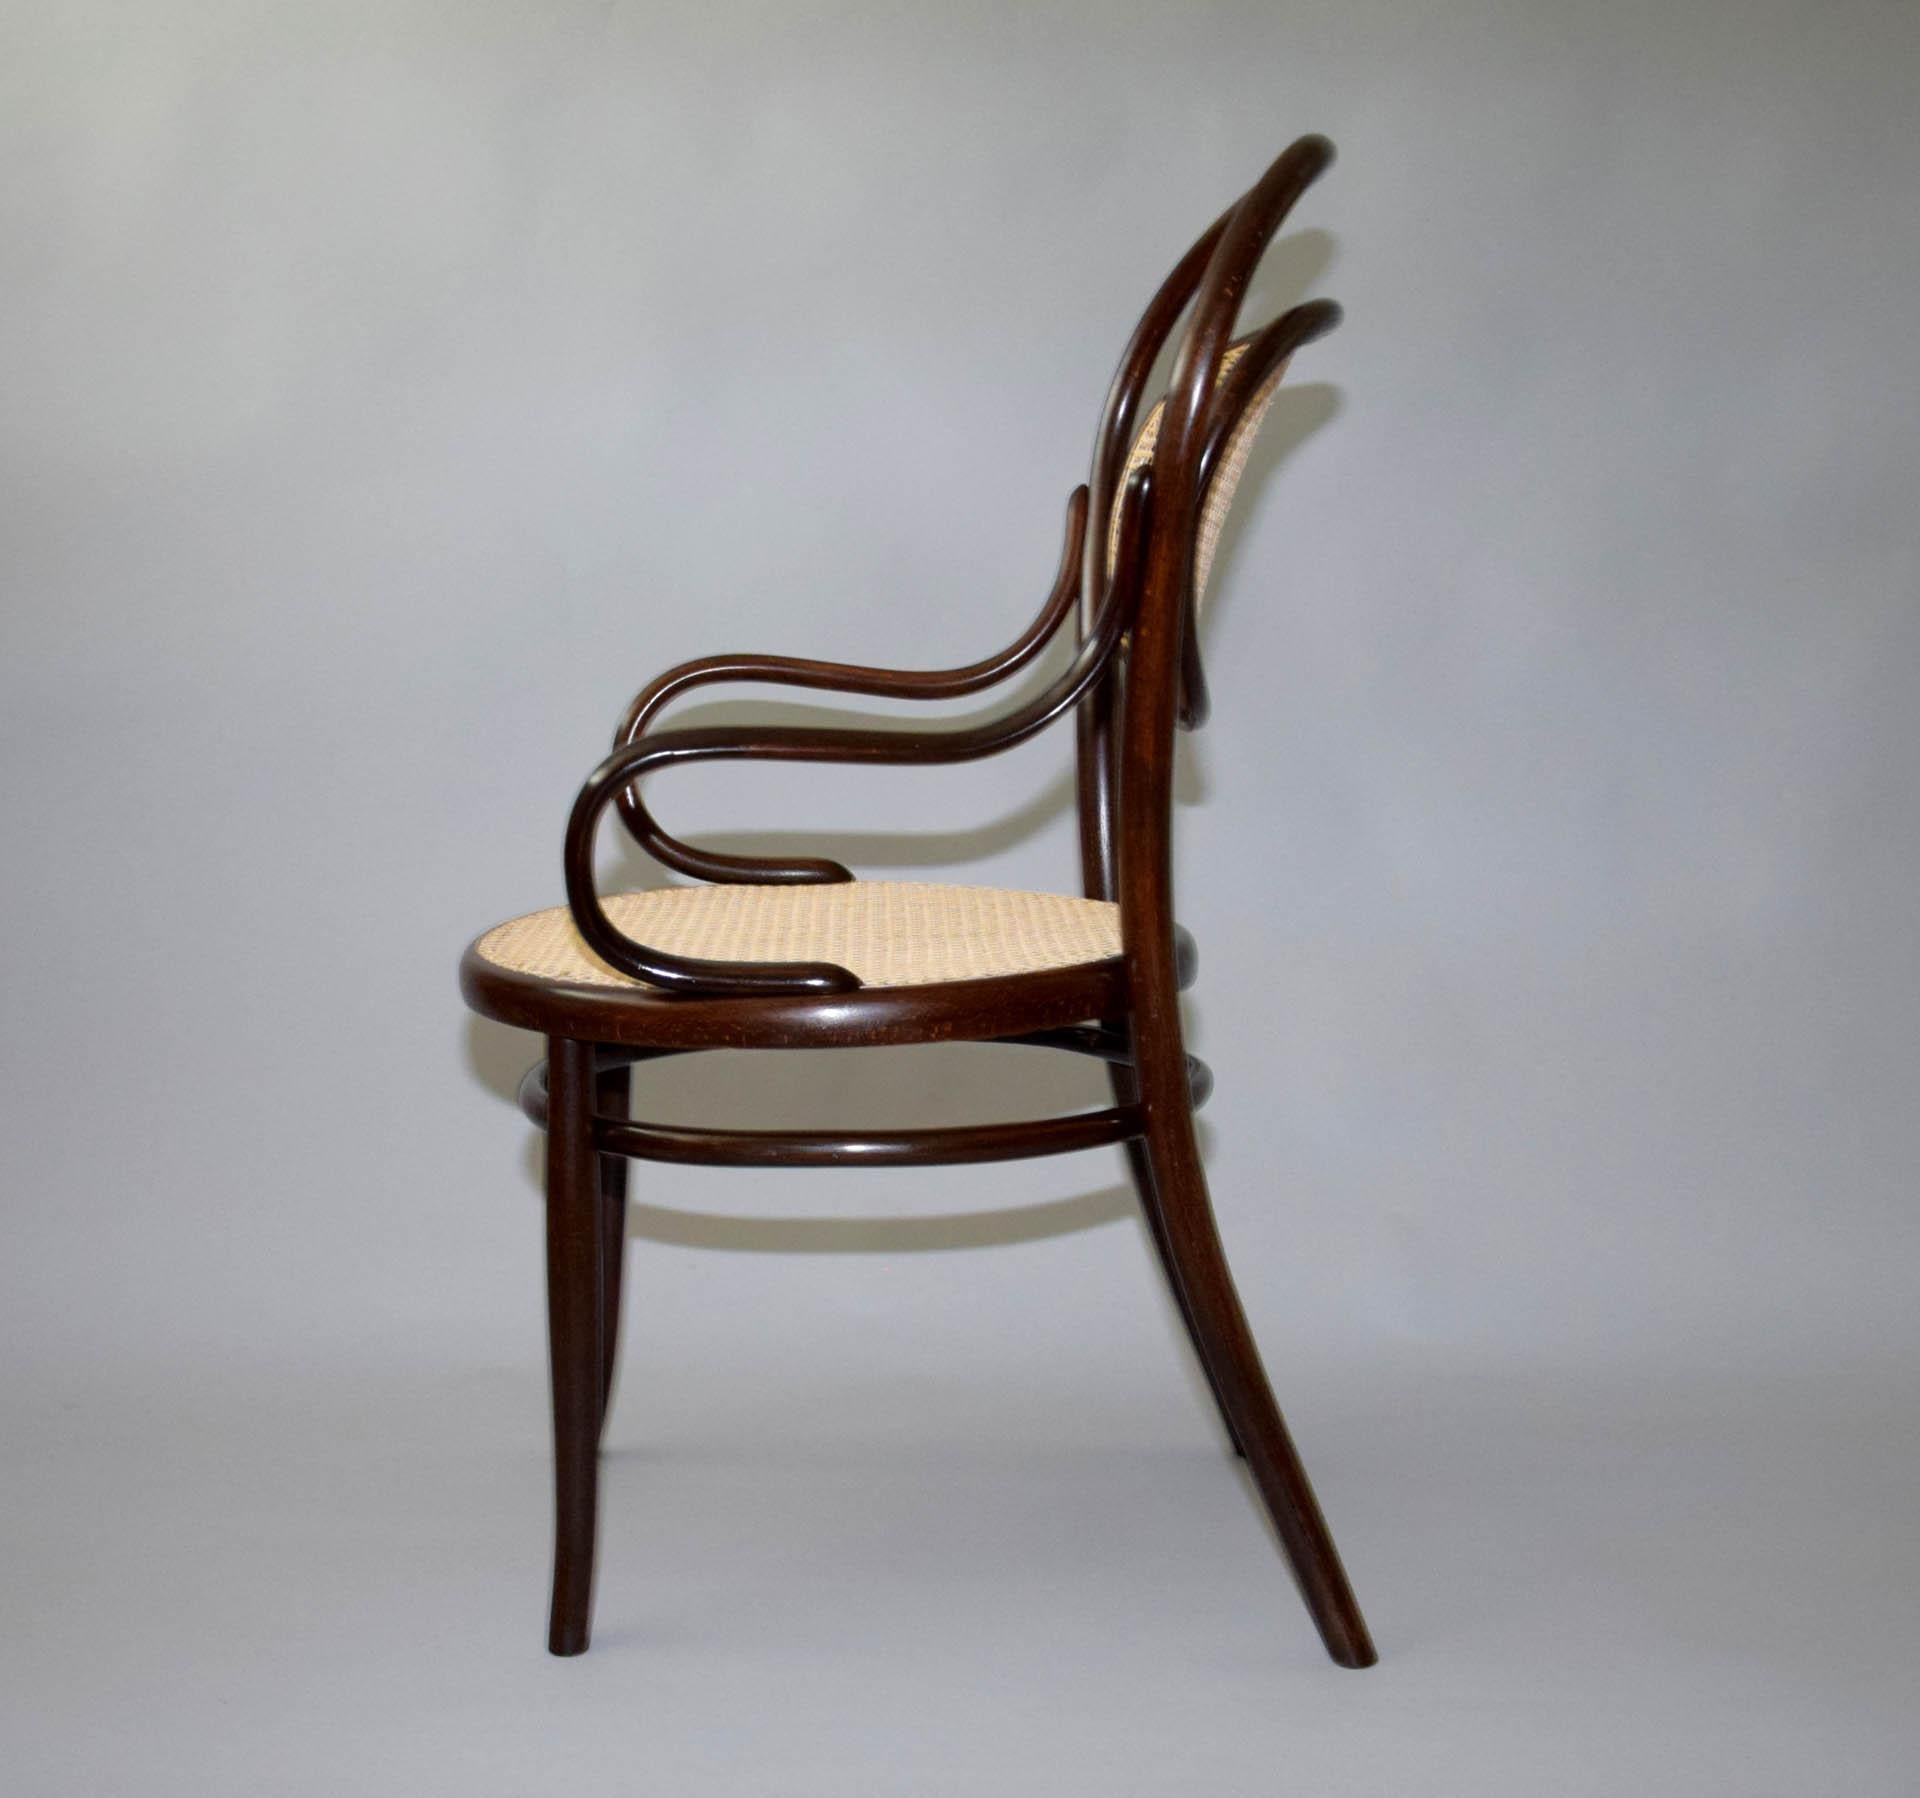 - Maker: Thonet
- Suitable to writing desk
- Completely carefully refurbished
- New shellac finish handly polished
- Made of massive beechwood
- Published in Thonet catalogue (1904) and Gebruder Thonet catalogue (1888) - see the photos.